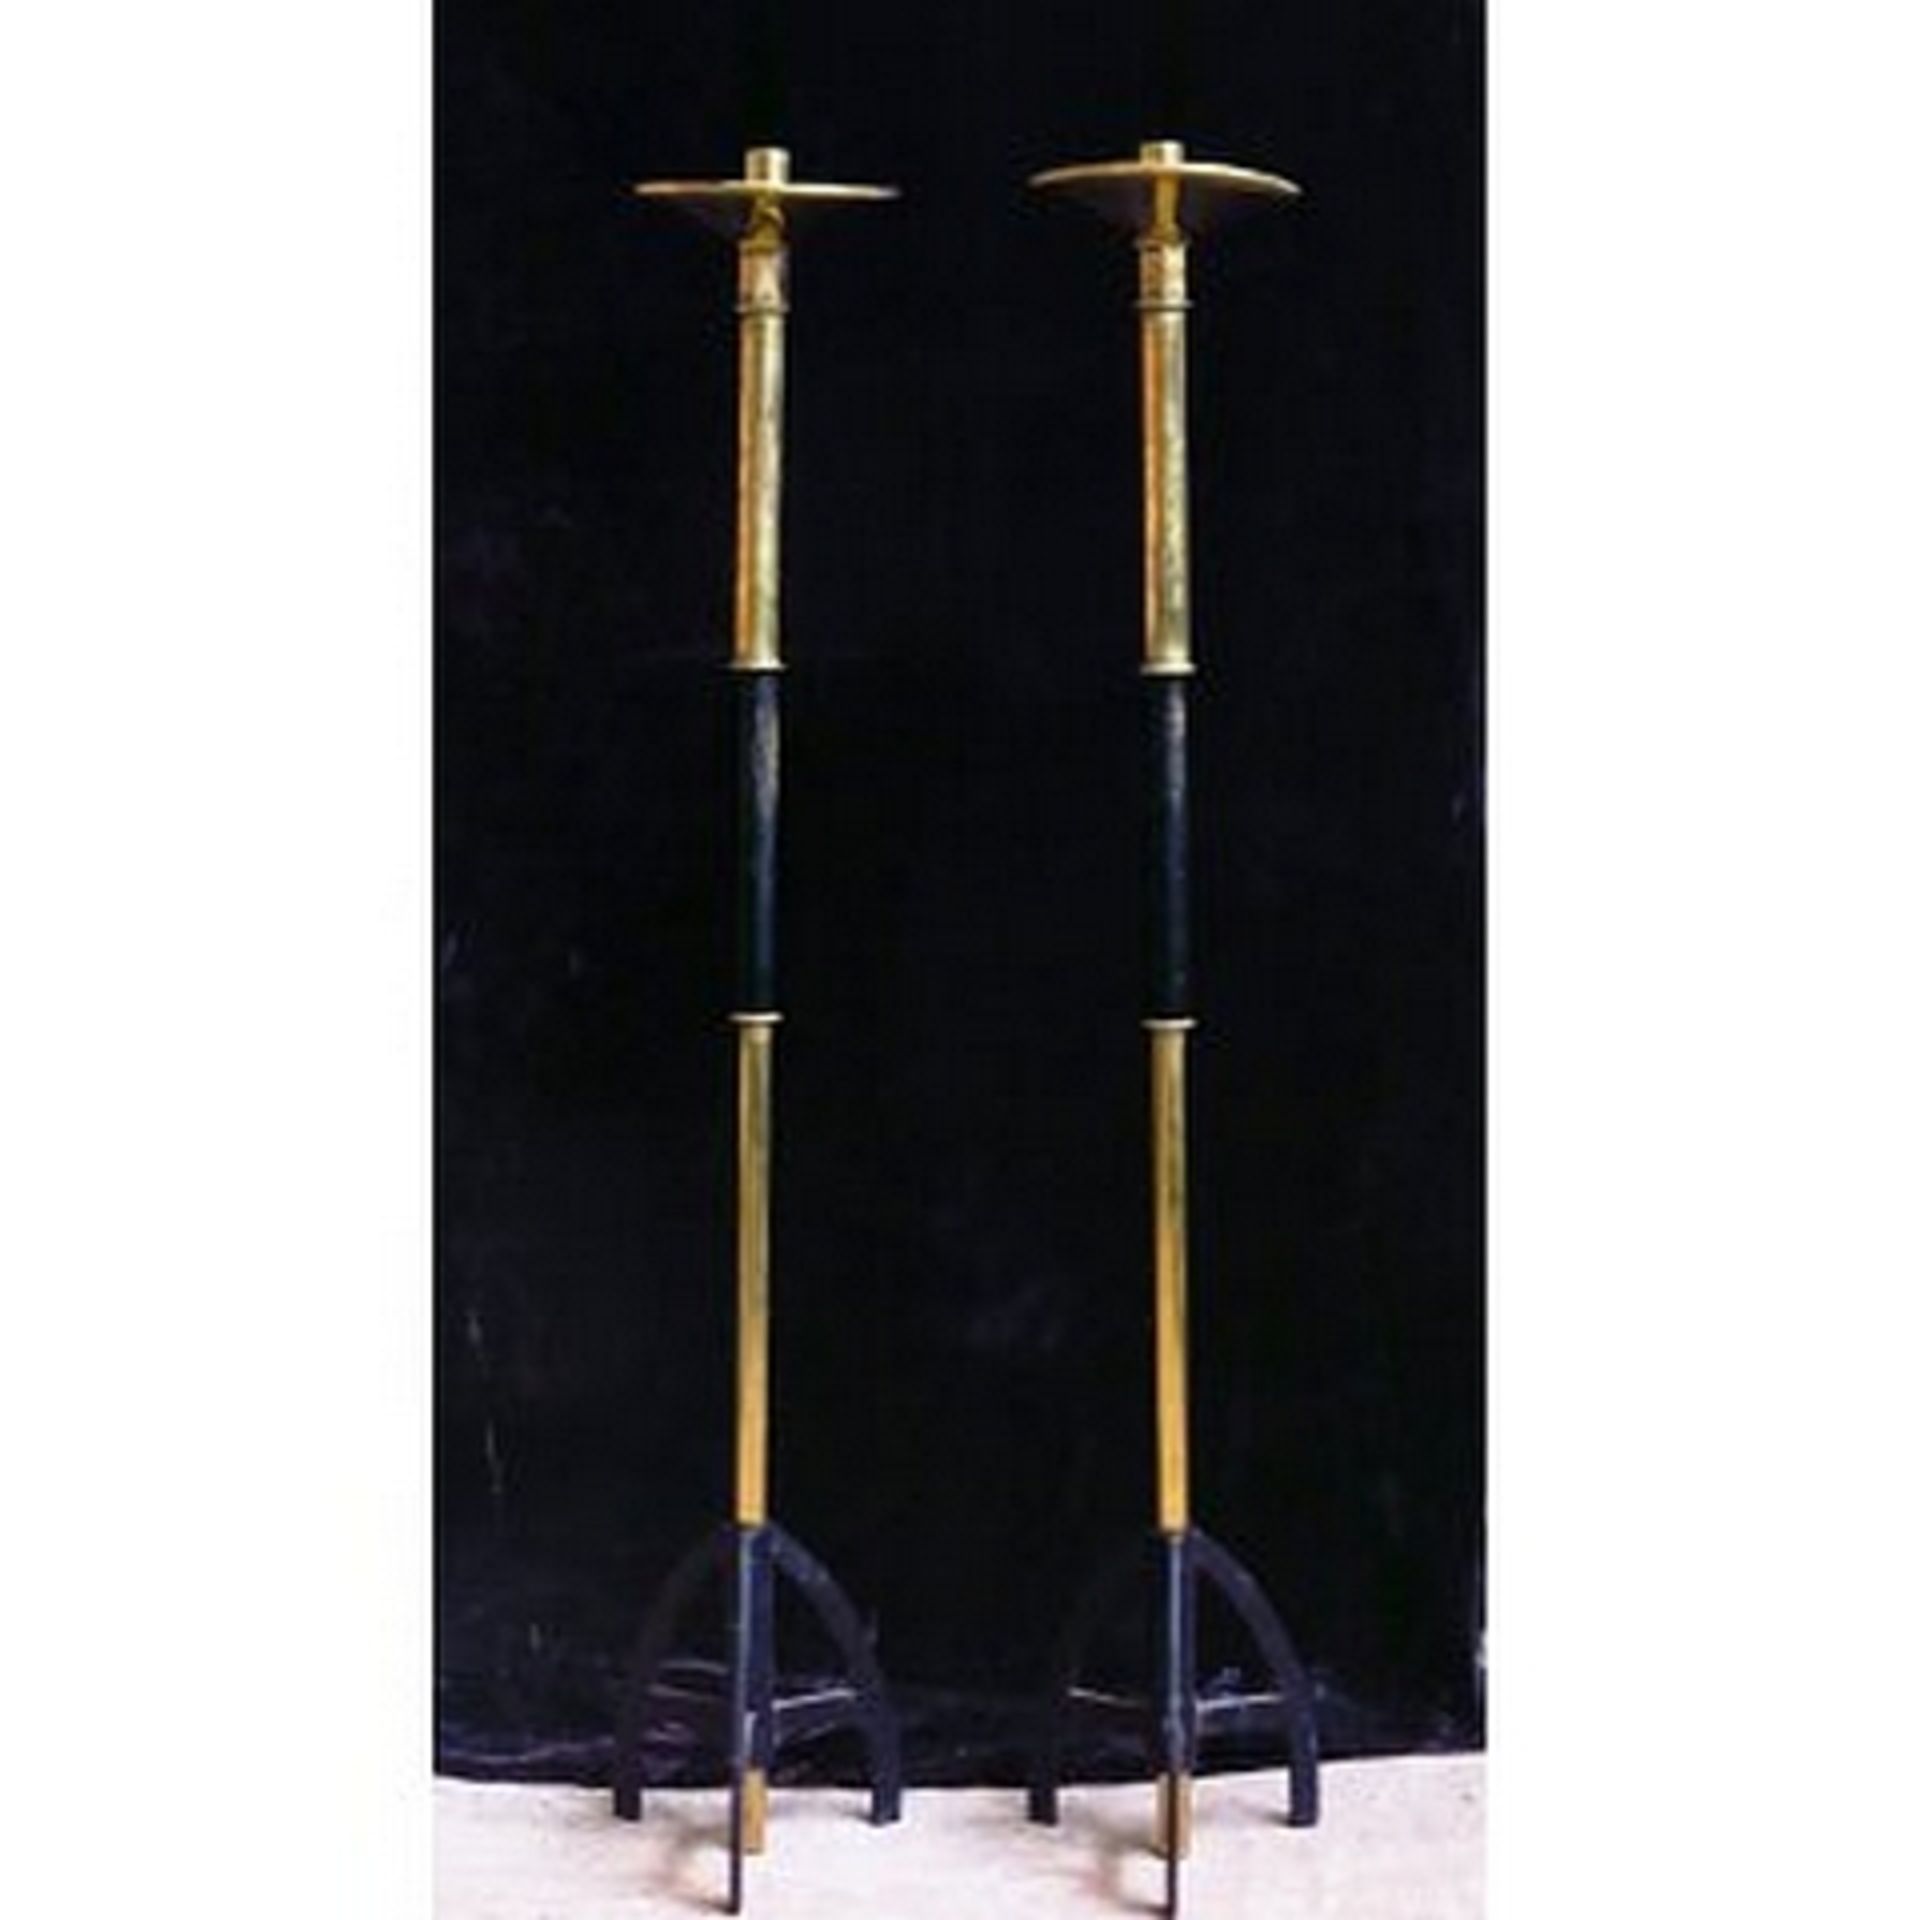 Pair of Modern Brass and Steel Acolyte Candlesticks and Bases